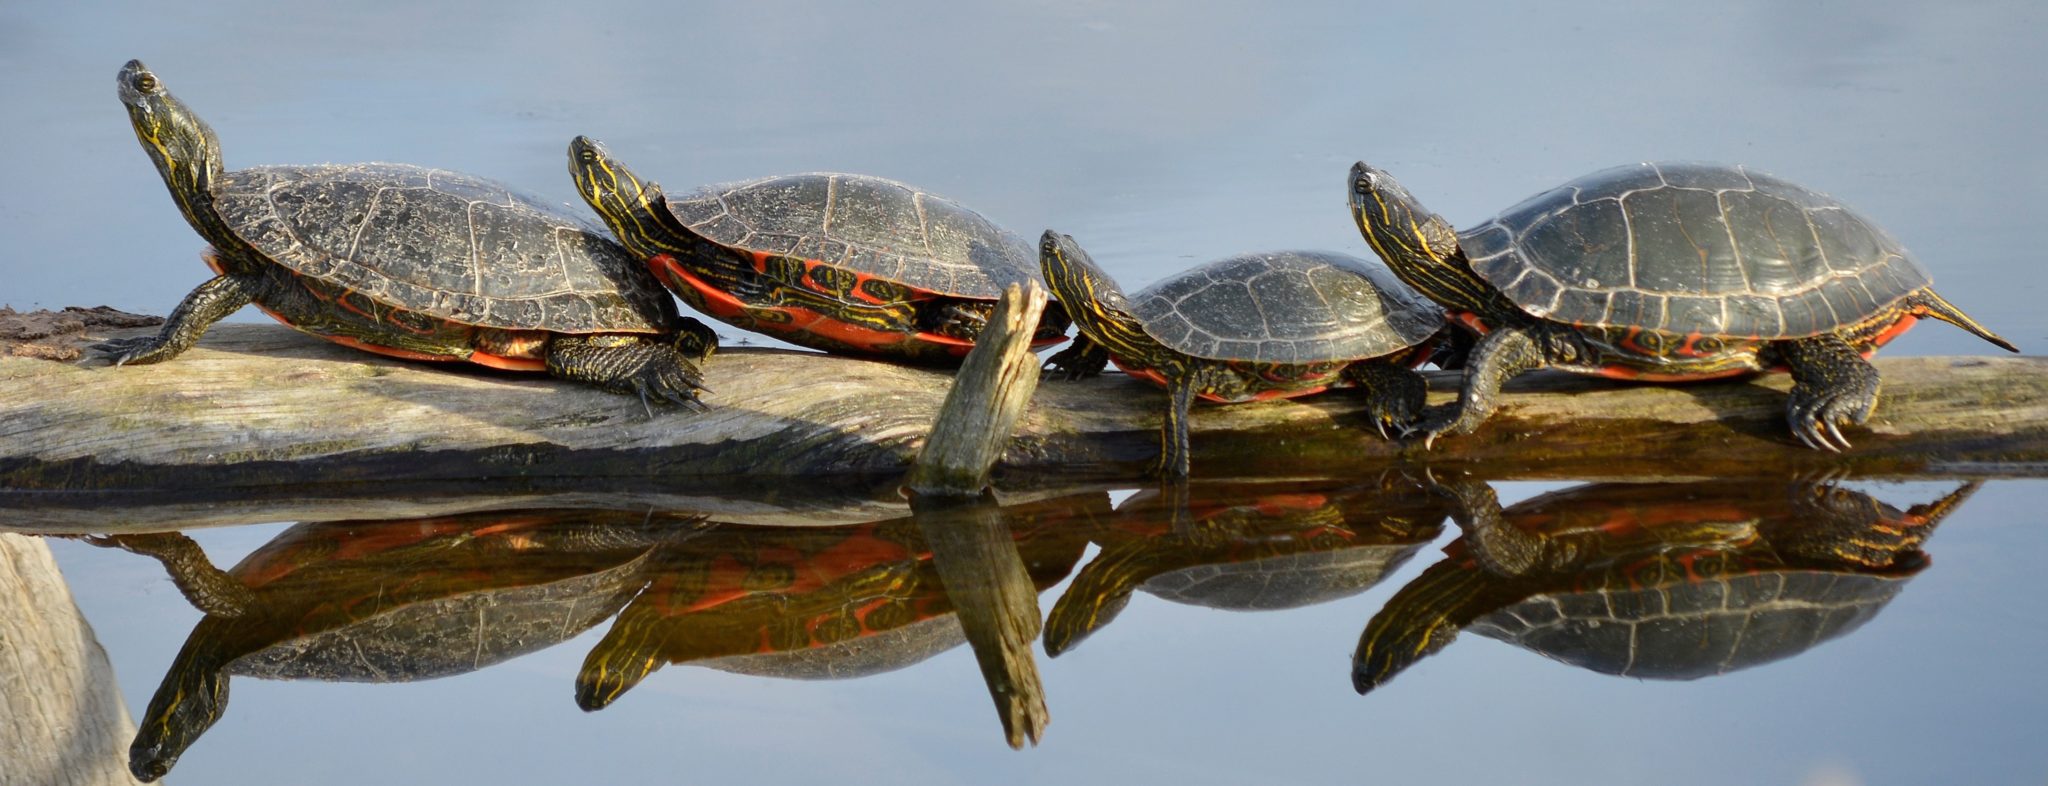 How many species of turtles are there in the USA?